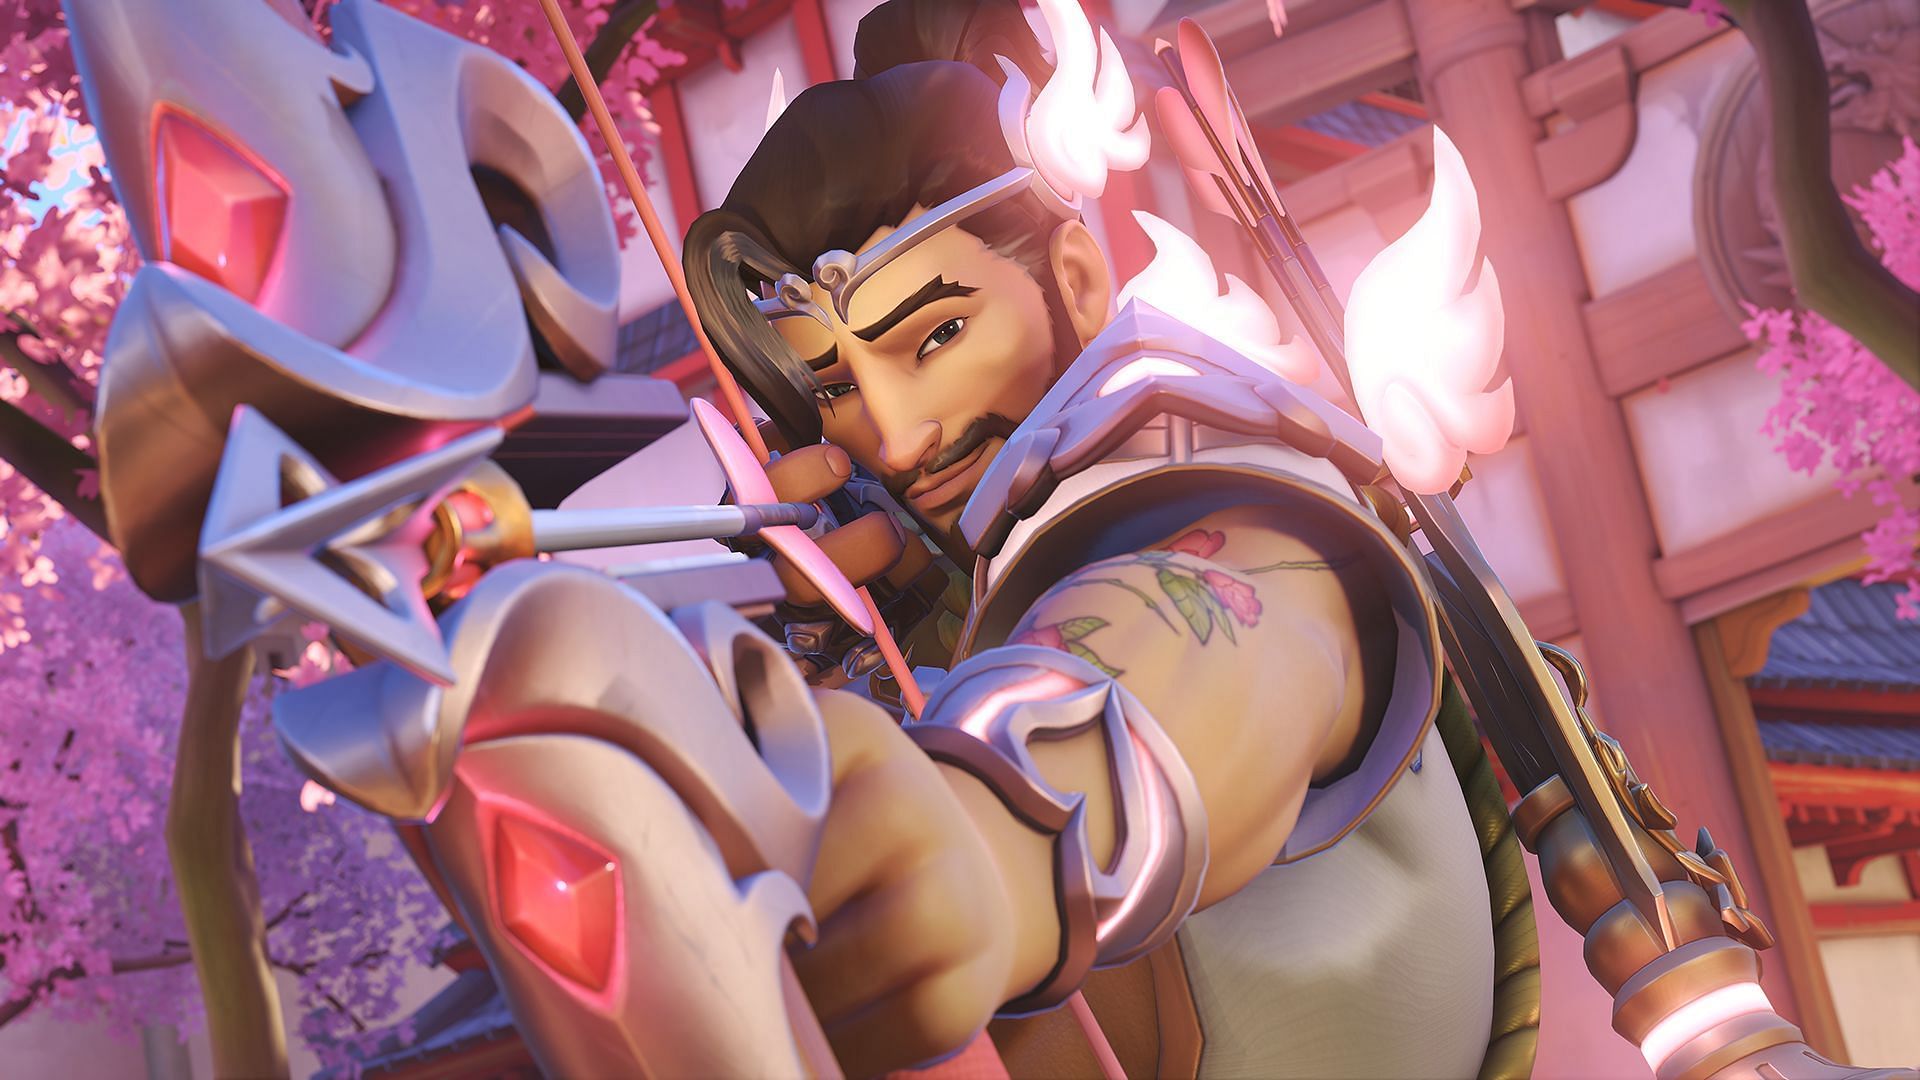 Hanzo will play the role of Cupid in Overwatch 2